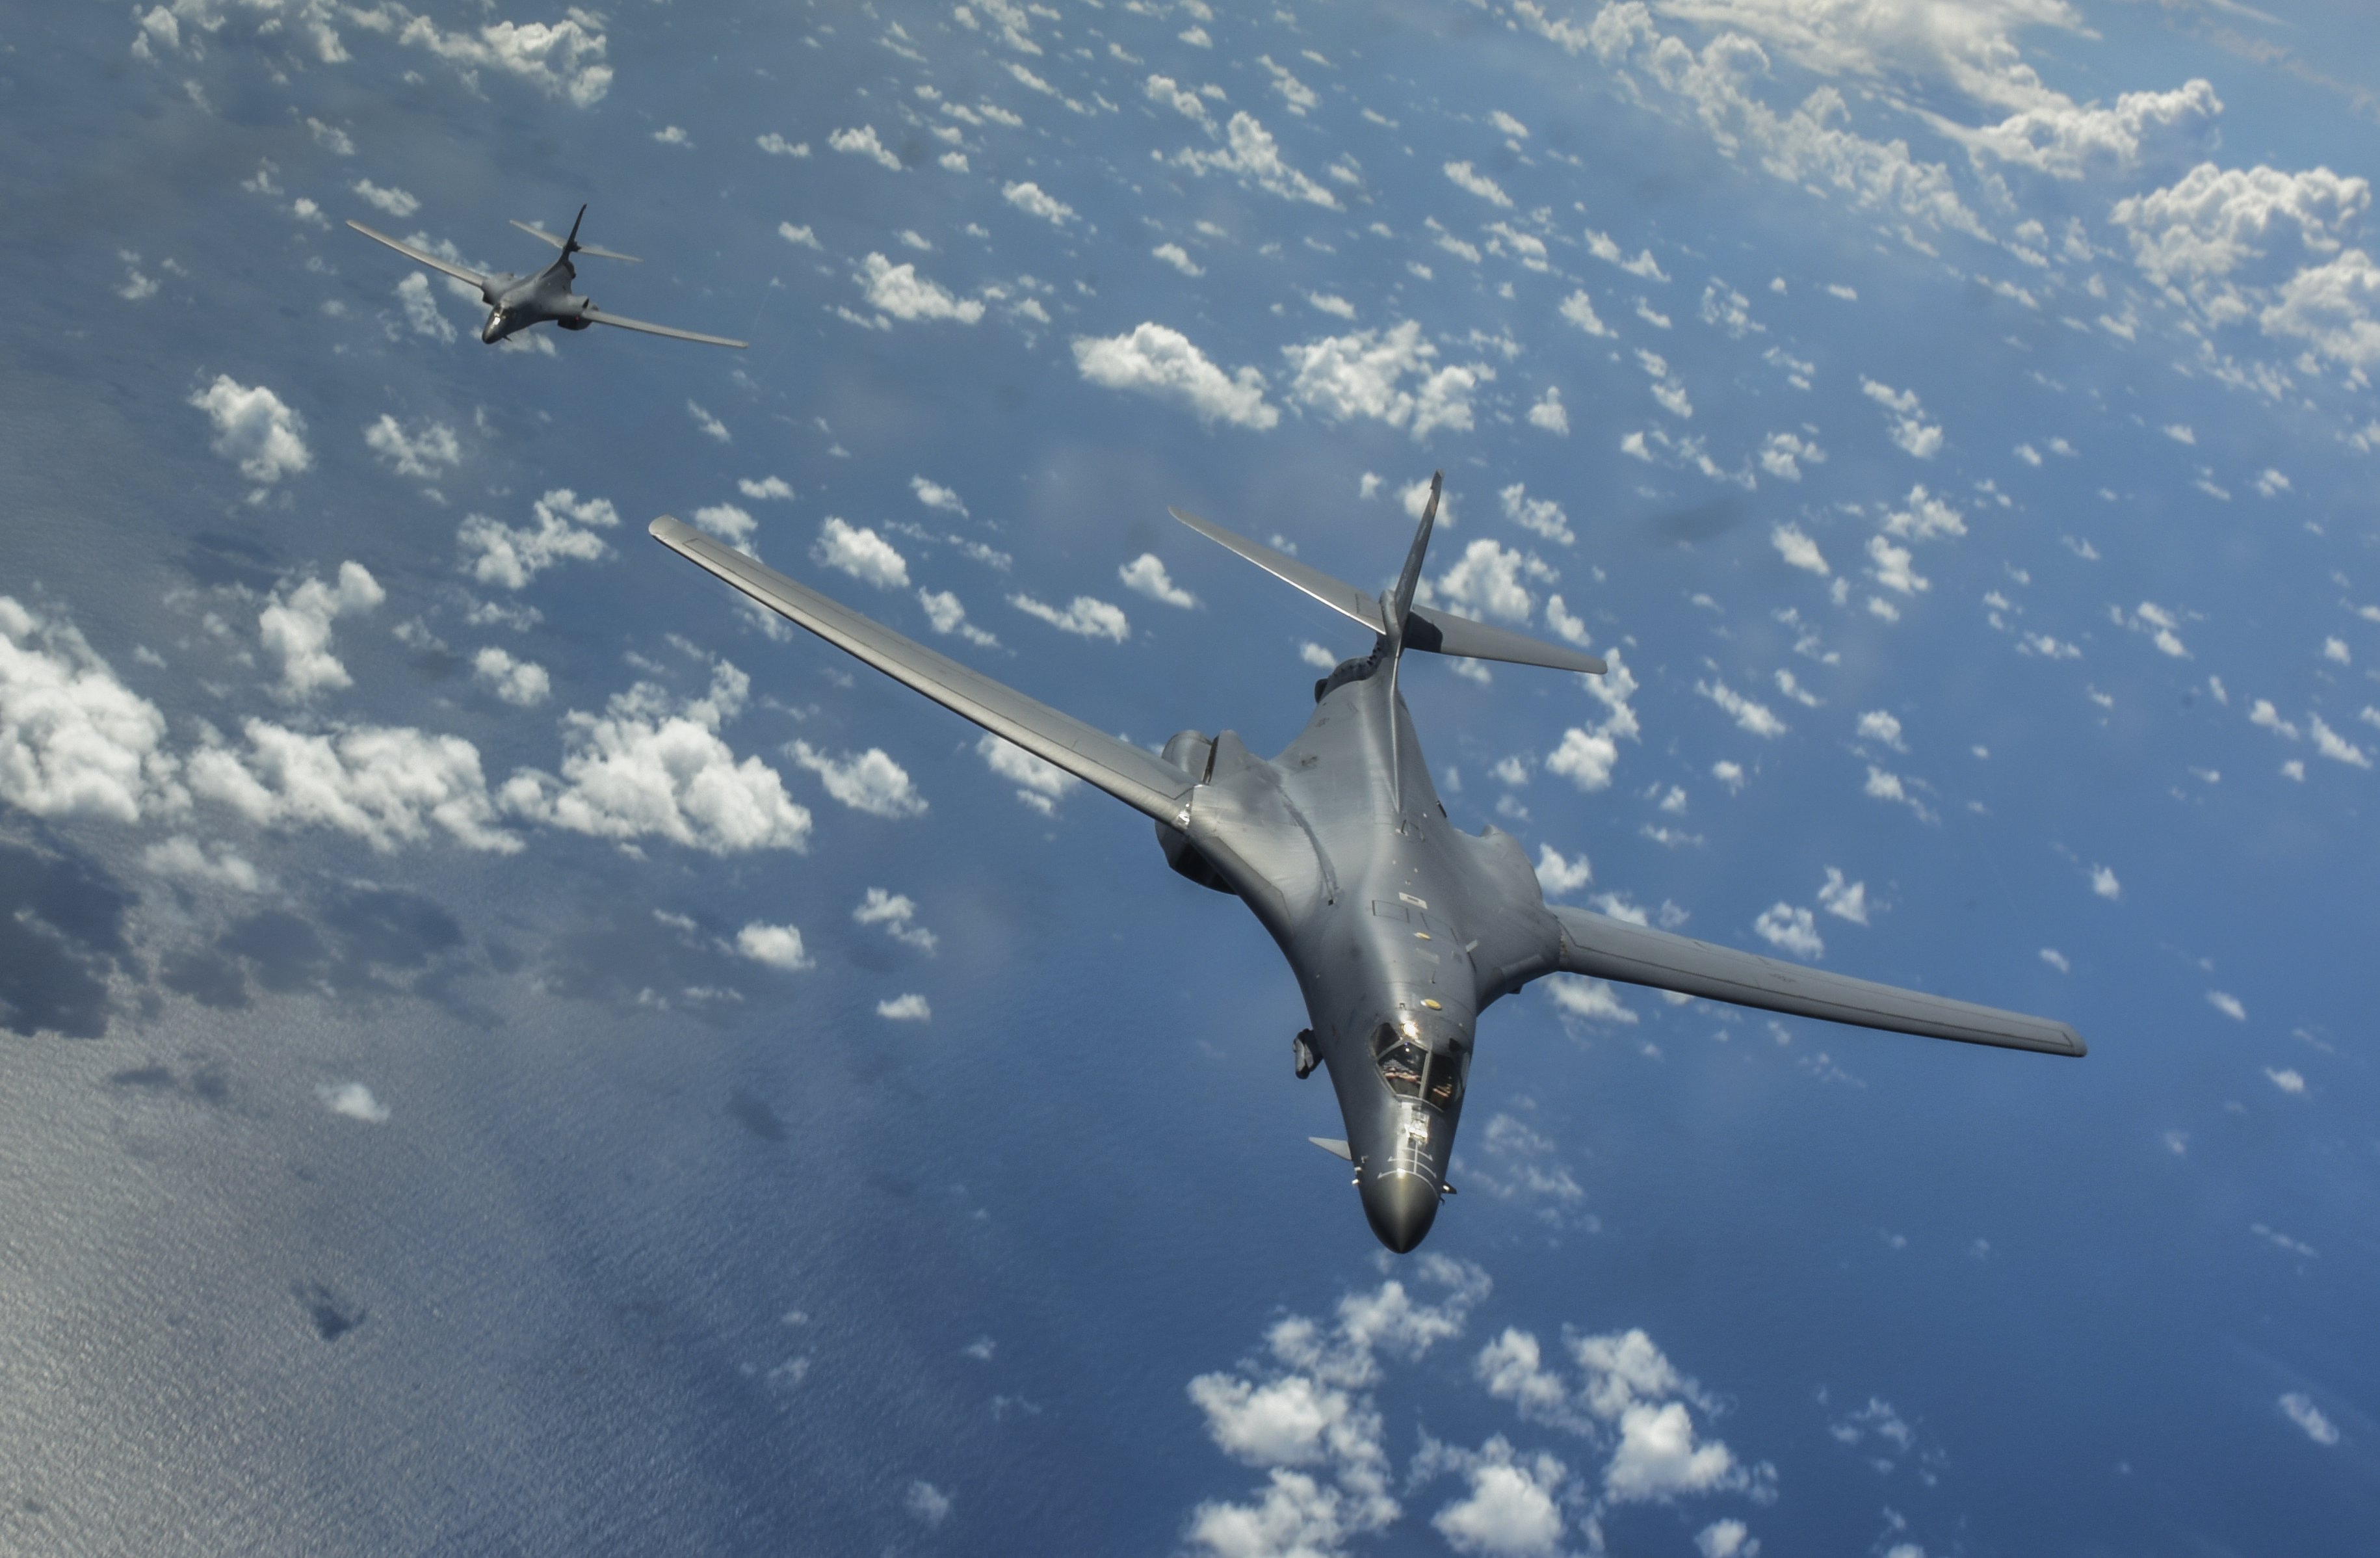 B-1B 'Lancer' bombers are massive supersonic jets